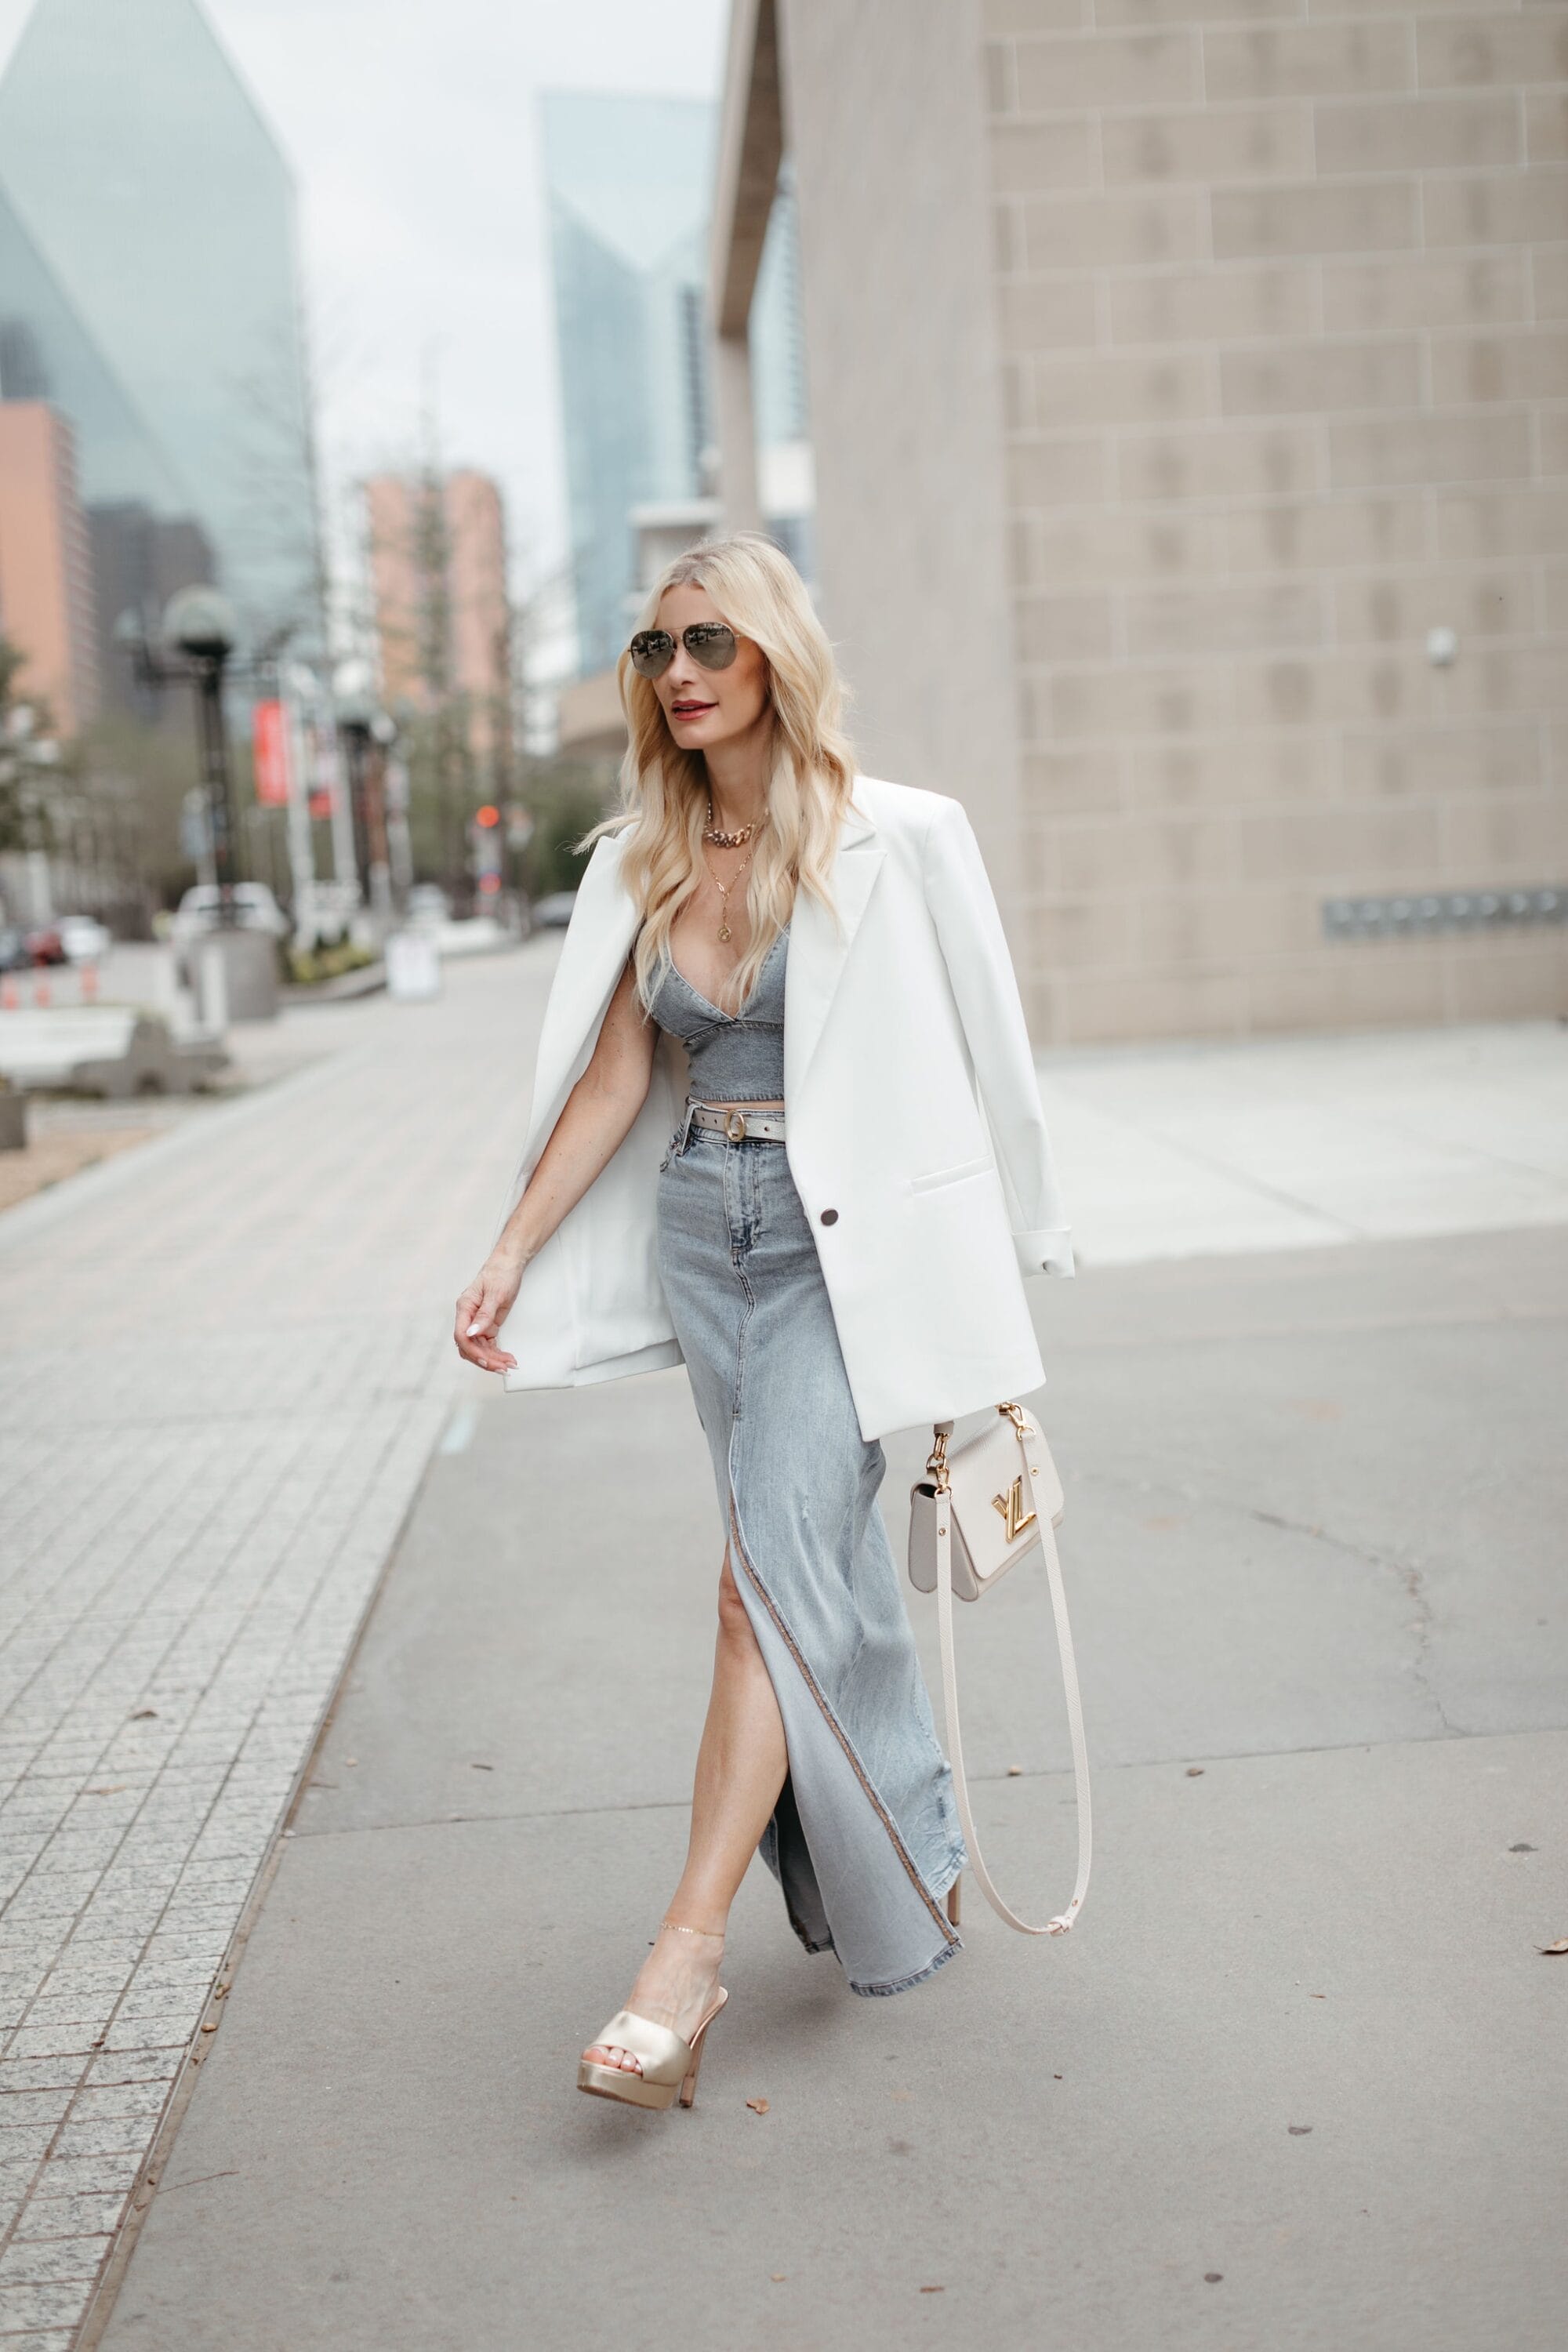 Over 40 woman wearing denim bra top with white blazer and maxi skirt.